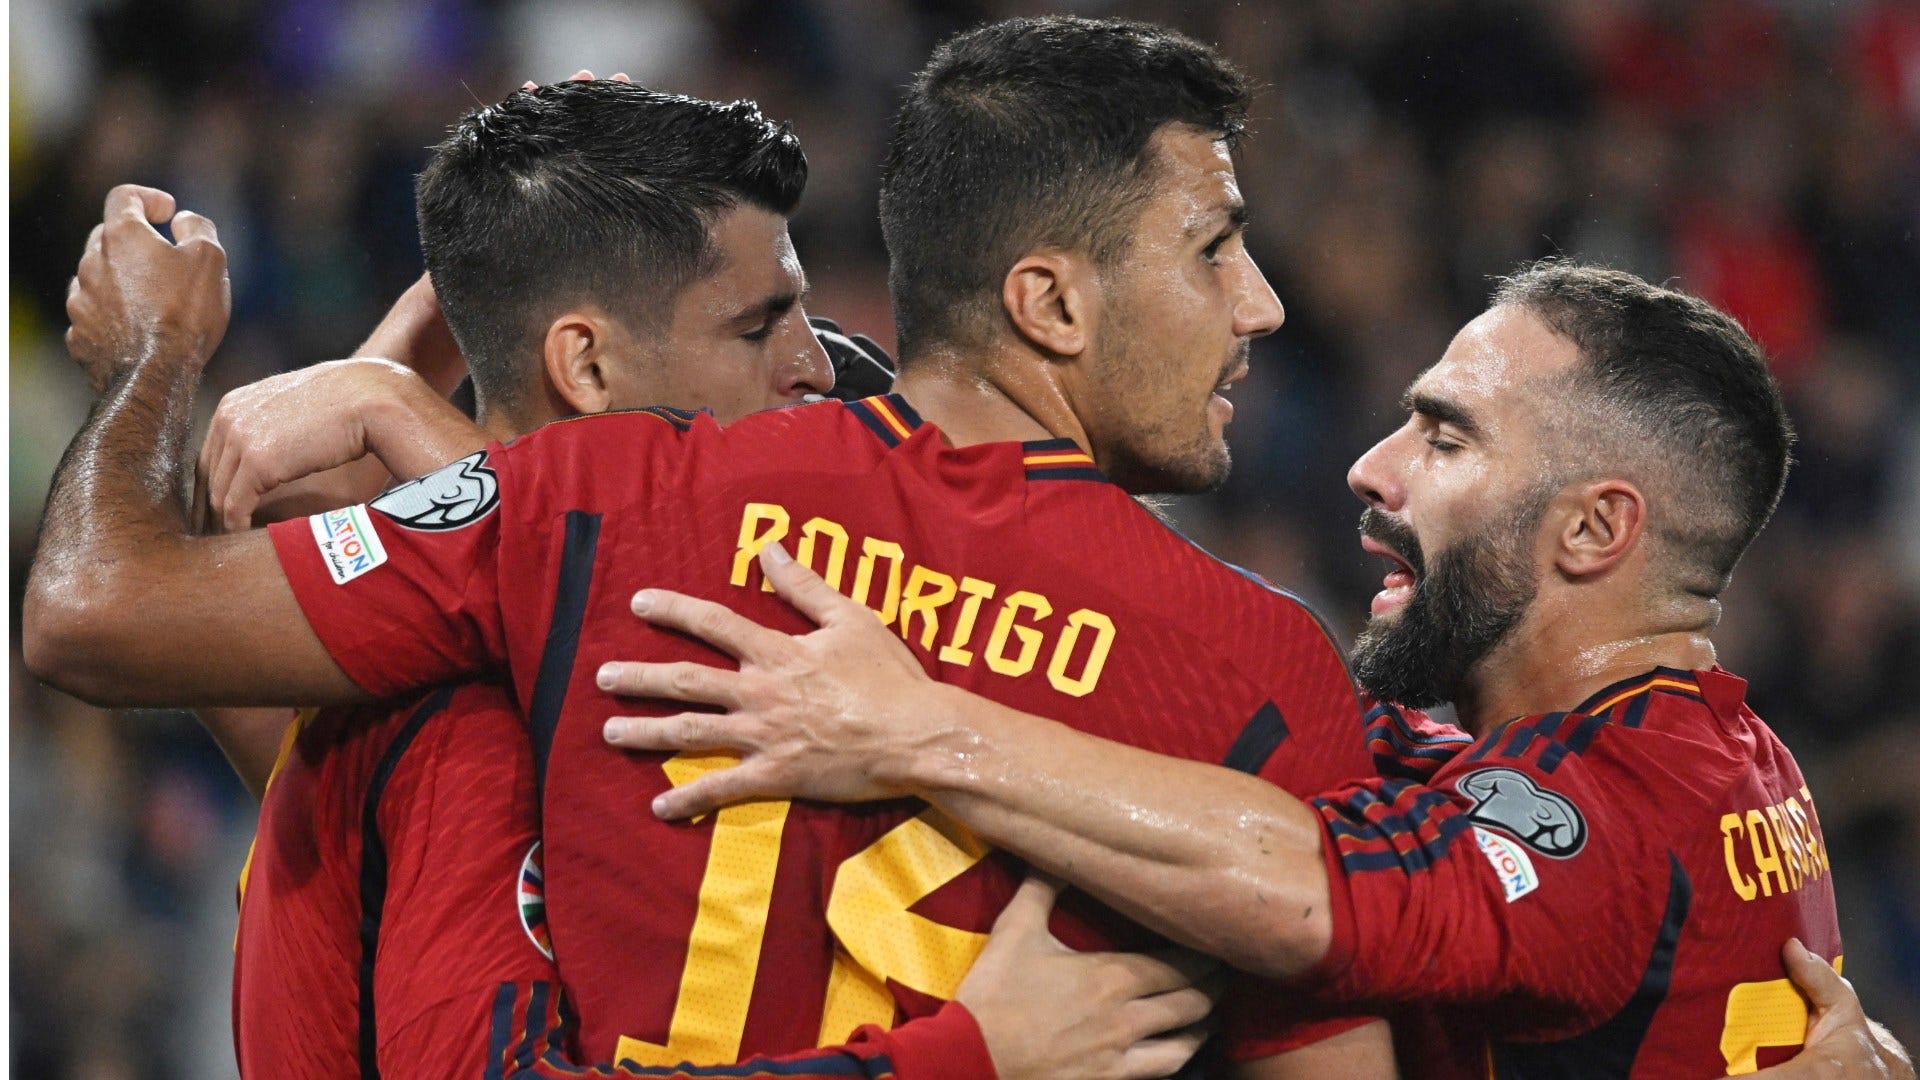 Spain vs Cyprus Live stream, TV channel, kick-off time and where to watch Goal US